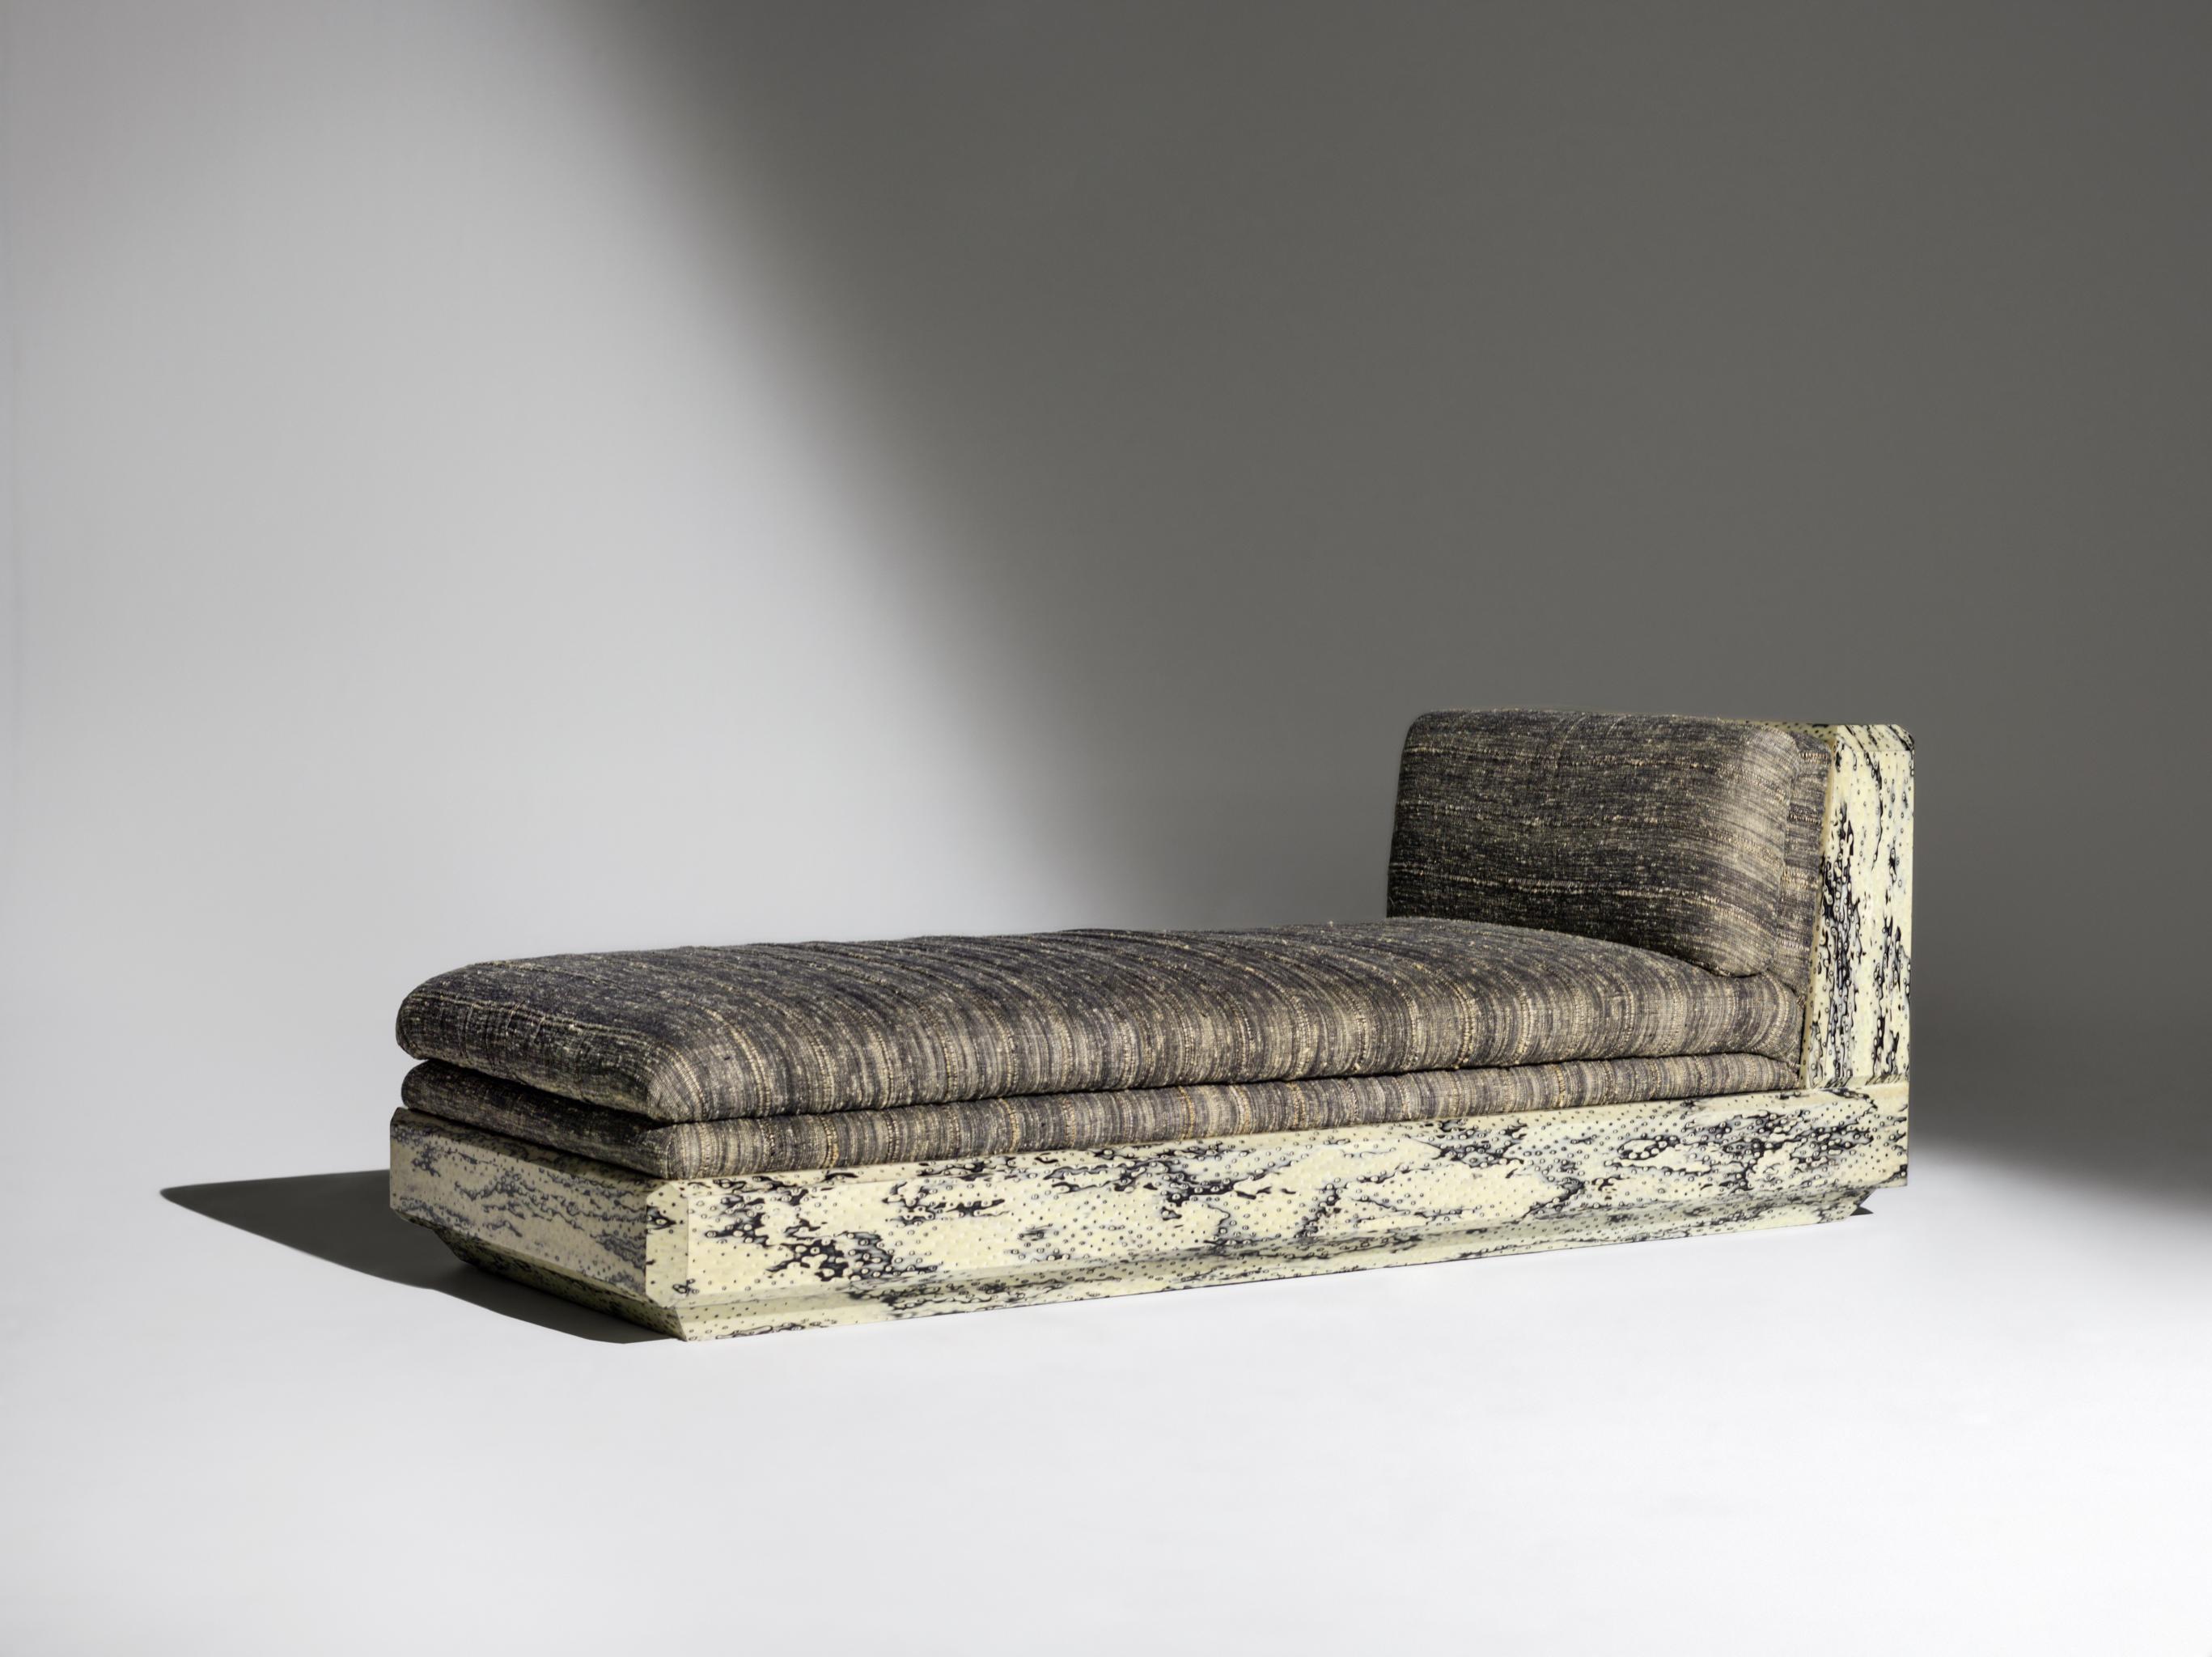  Sofa made in mdf with wood veneer finish and 100% cotton fabric.

Andrea Vargas Dieppa emerges as a figure of complexity and daring delicacy, possessing an unrivaled intuitive energy to craft her own cosmos through the body of work presented. Her